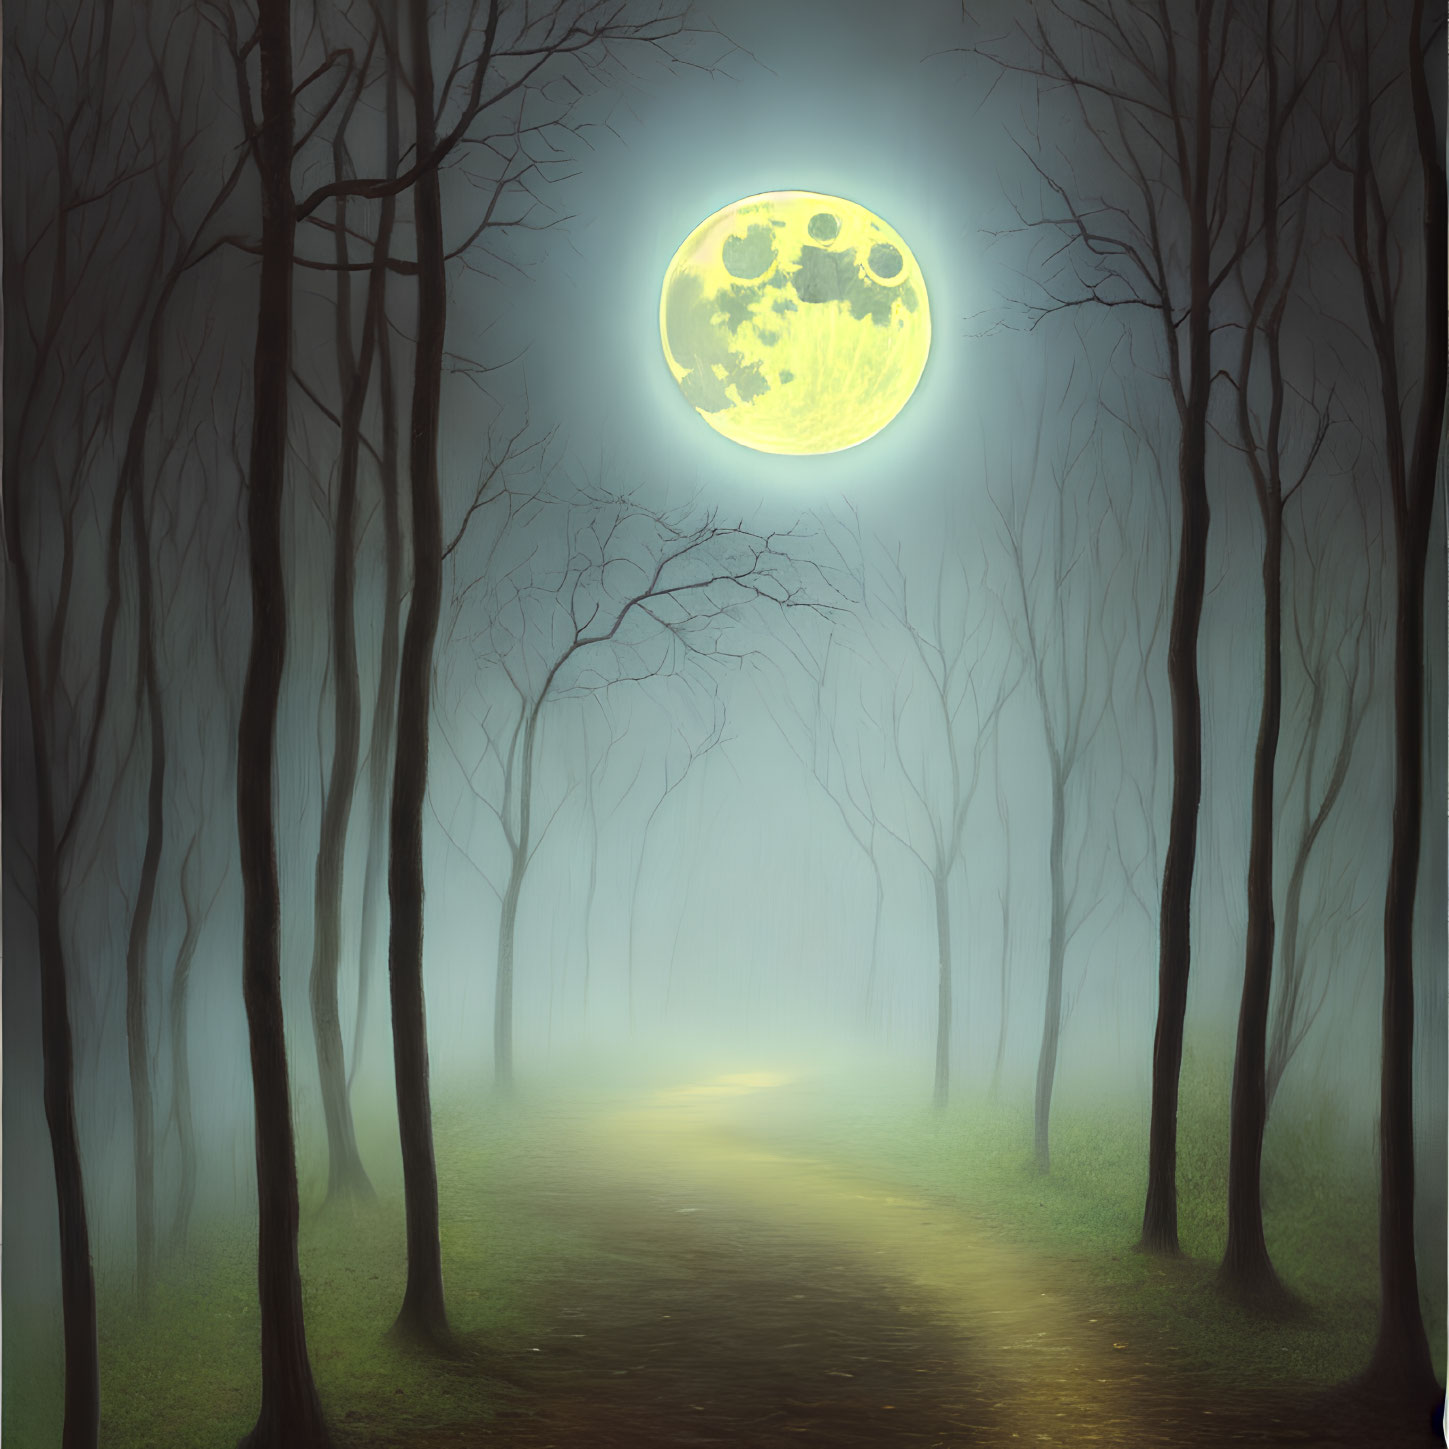 Moonlit Path Through Misty Forest with Full Moon